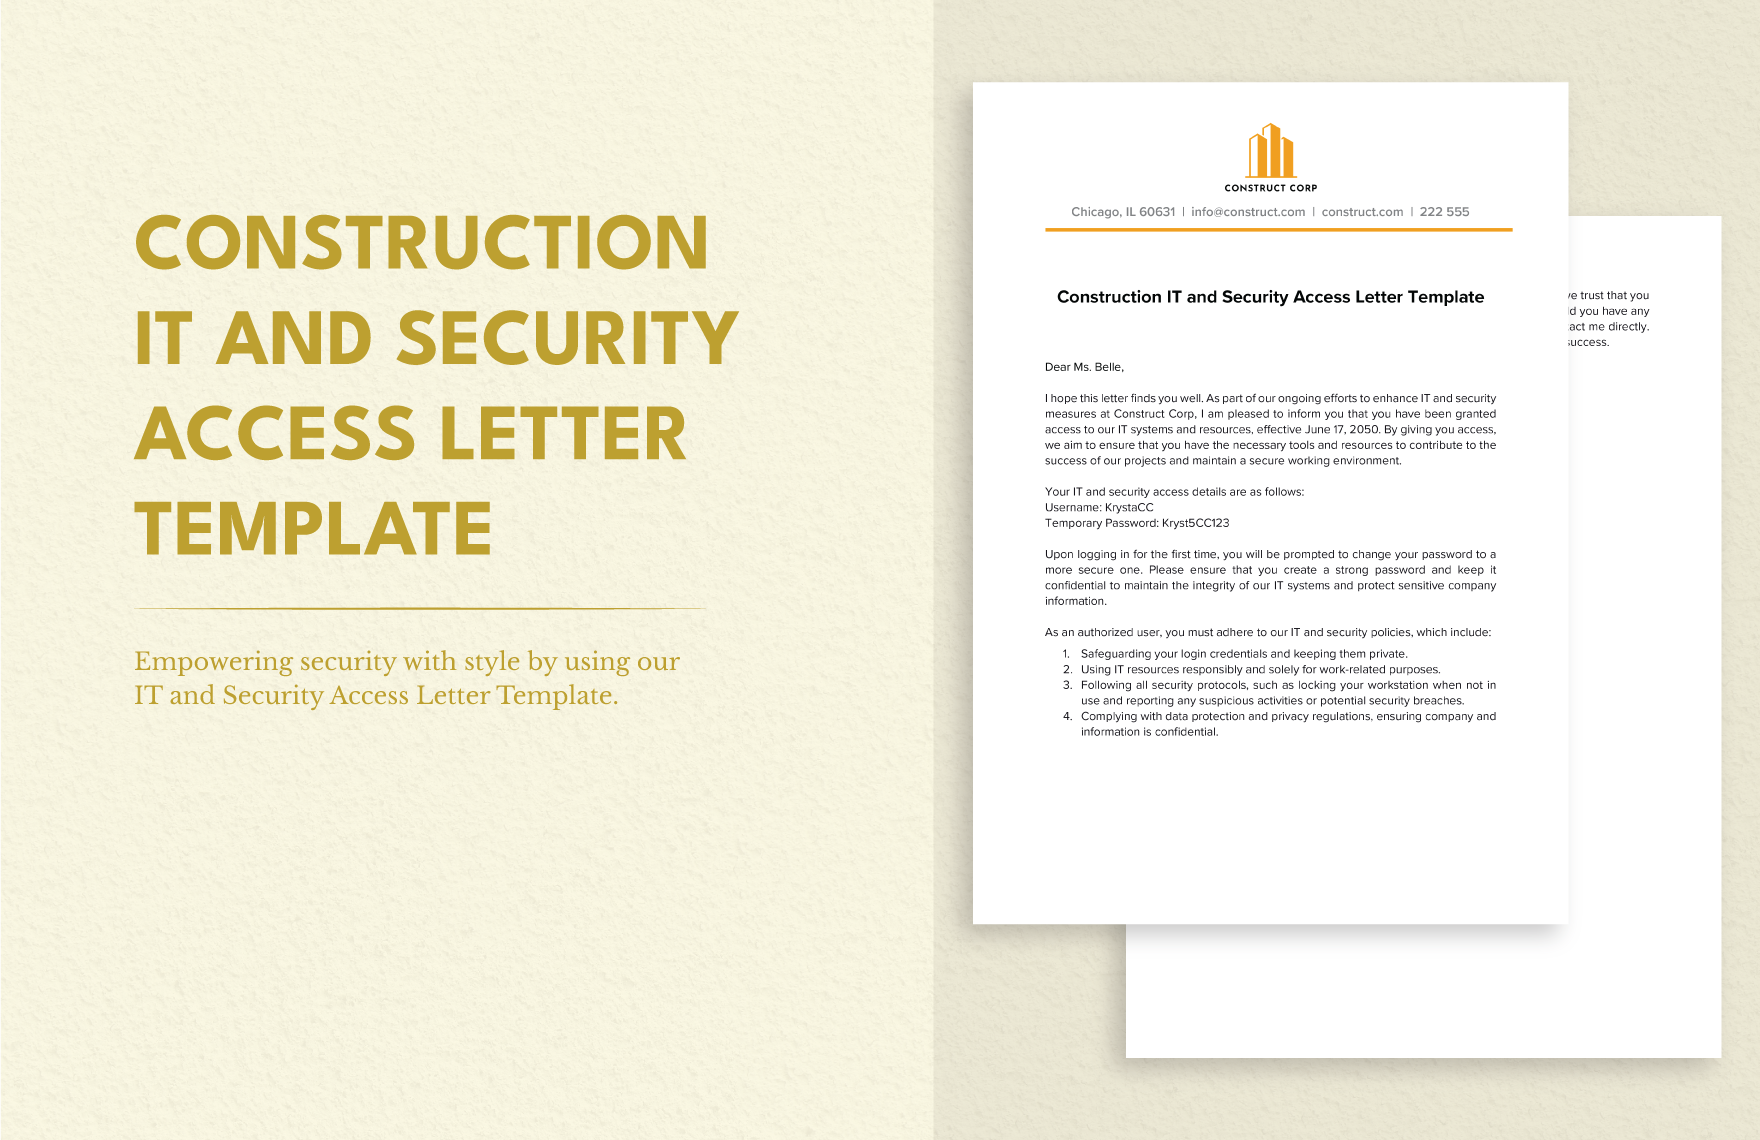 Construction IT and Security Access Letter Template